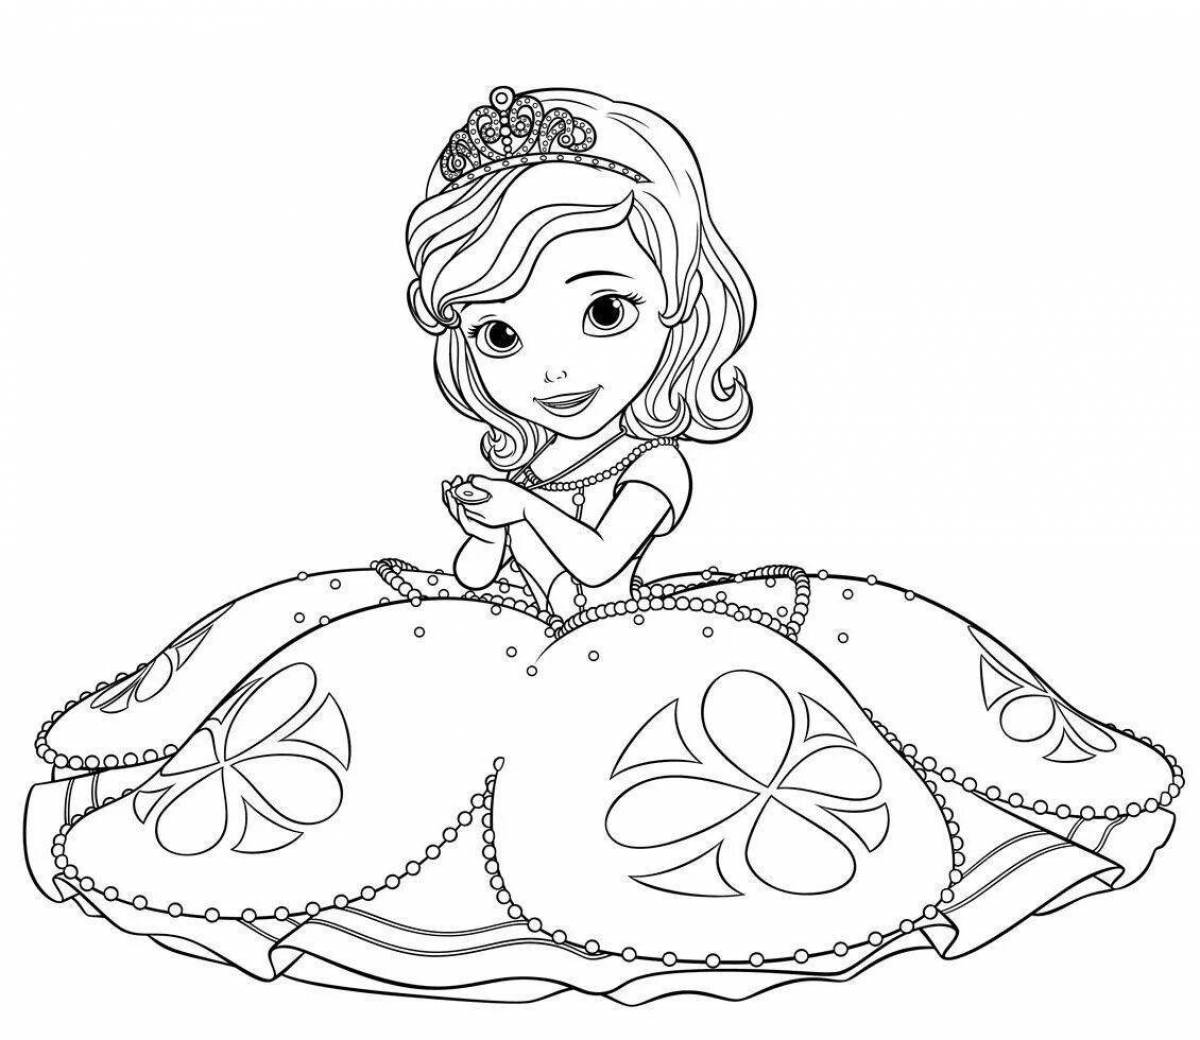 Elegant princess coloring pages 4-5 years old